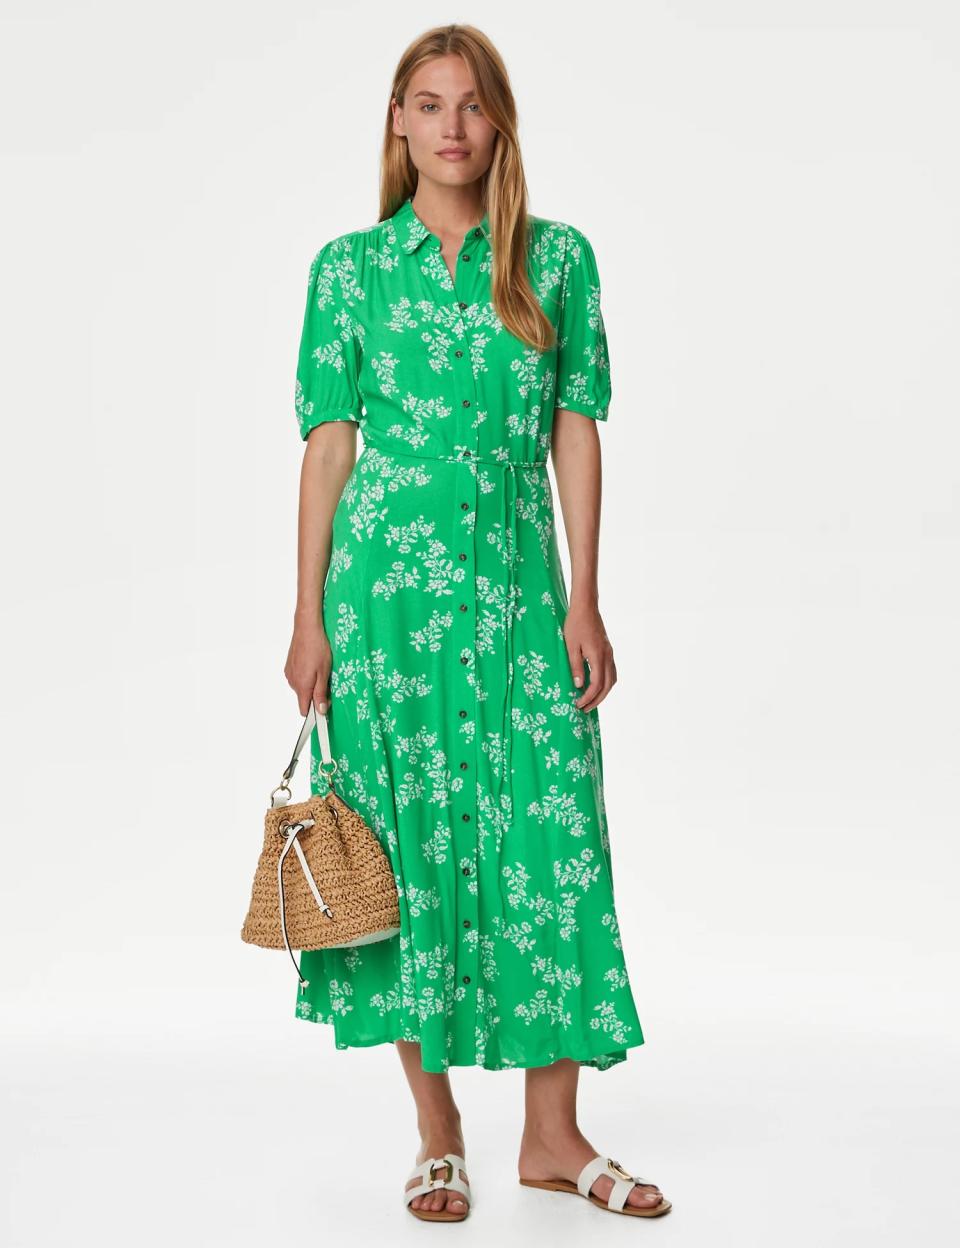 Green printed midaxi dress from Marks & Spencer.